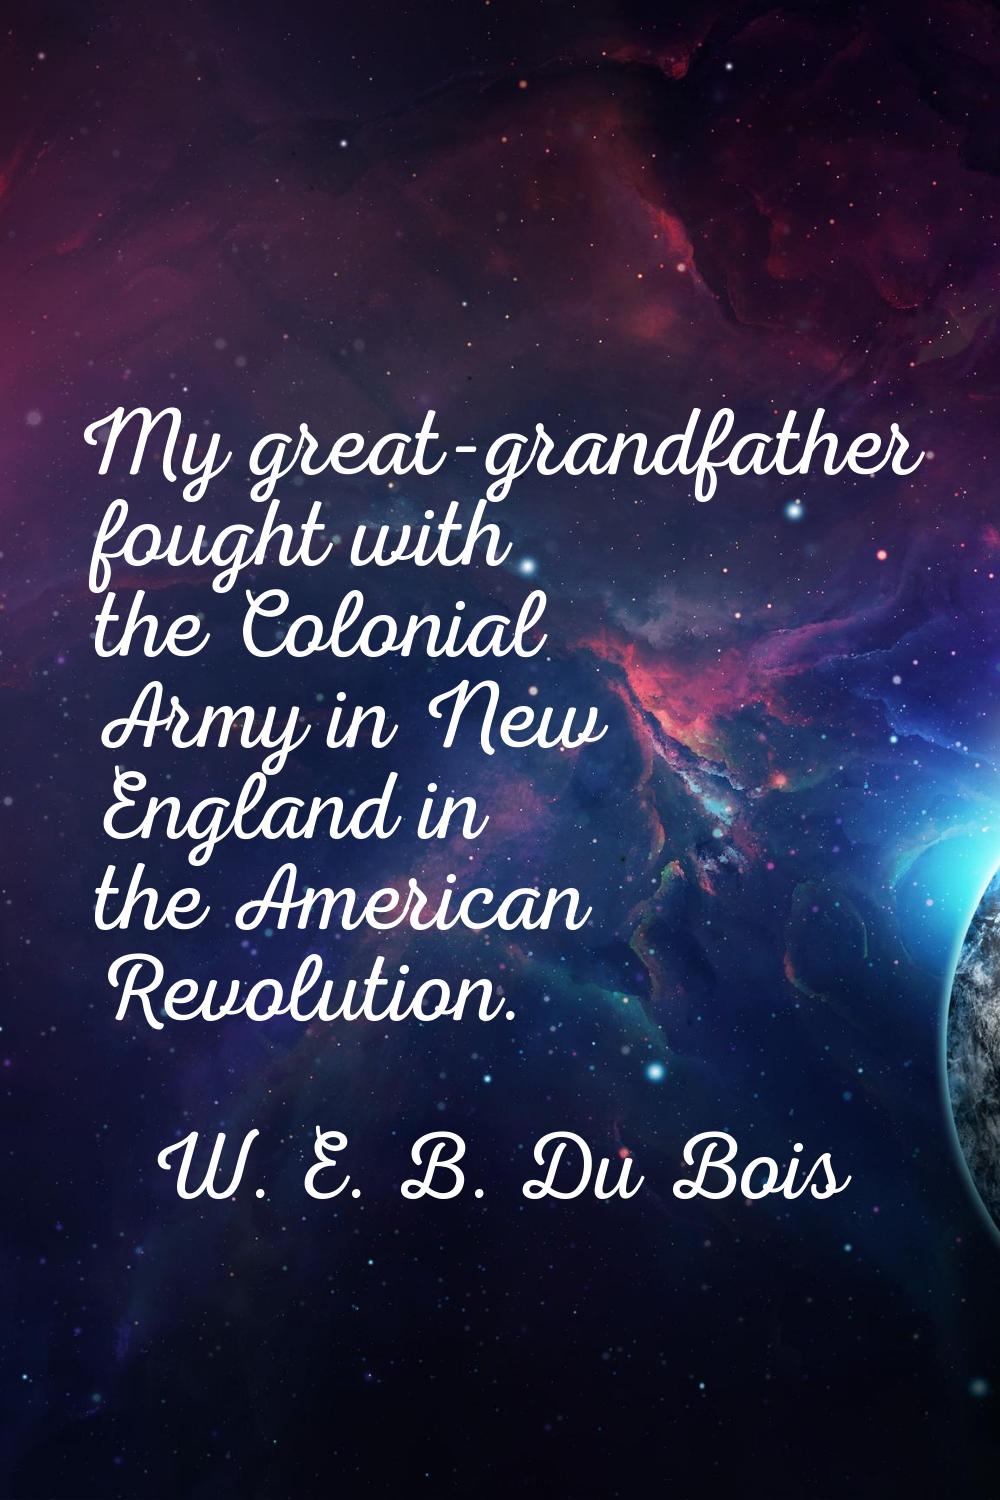 My great-grandfather fought with the Colonial Army in New England in the American Revolution.